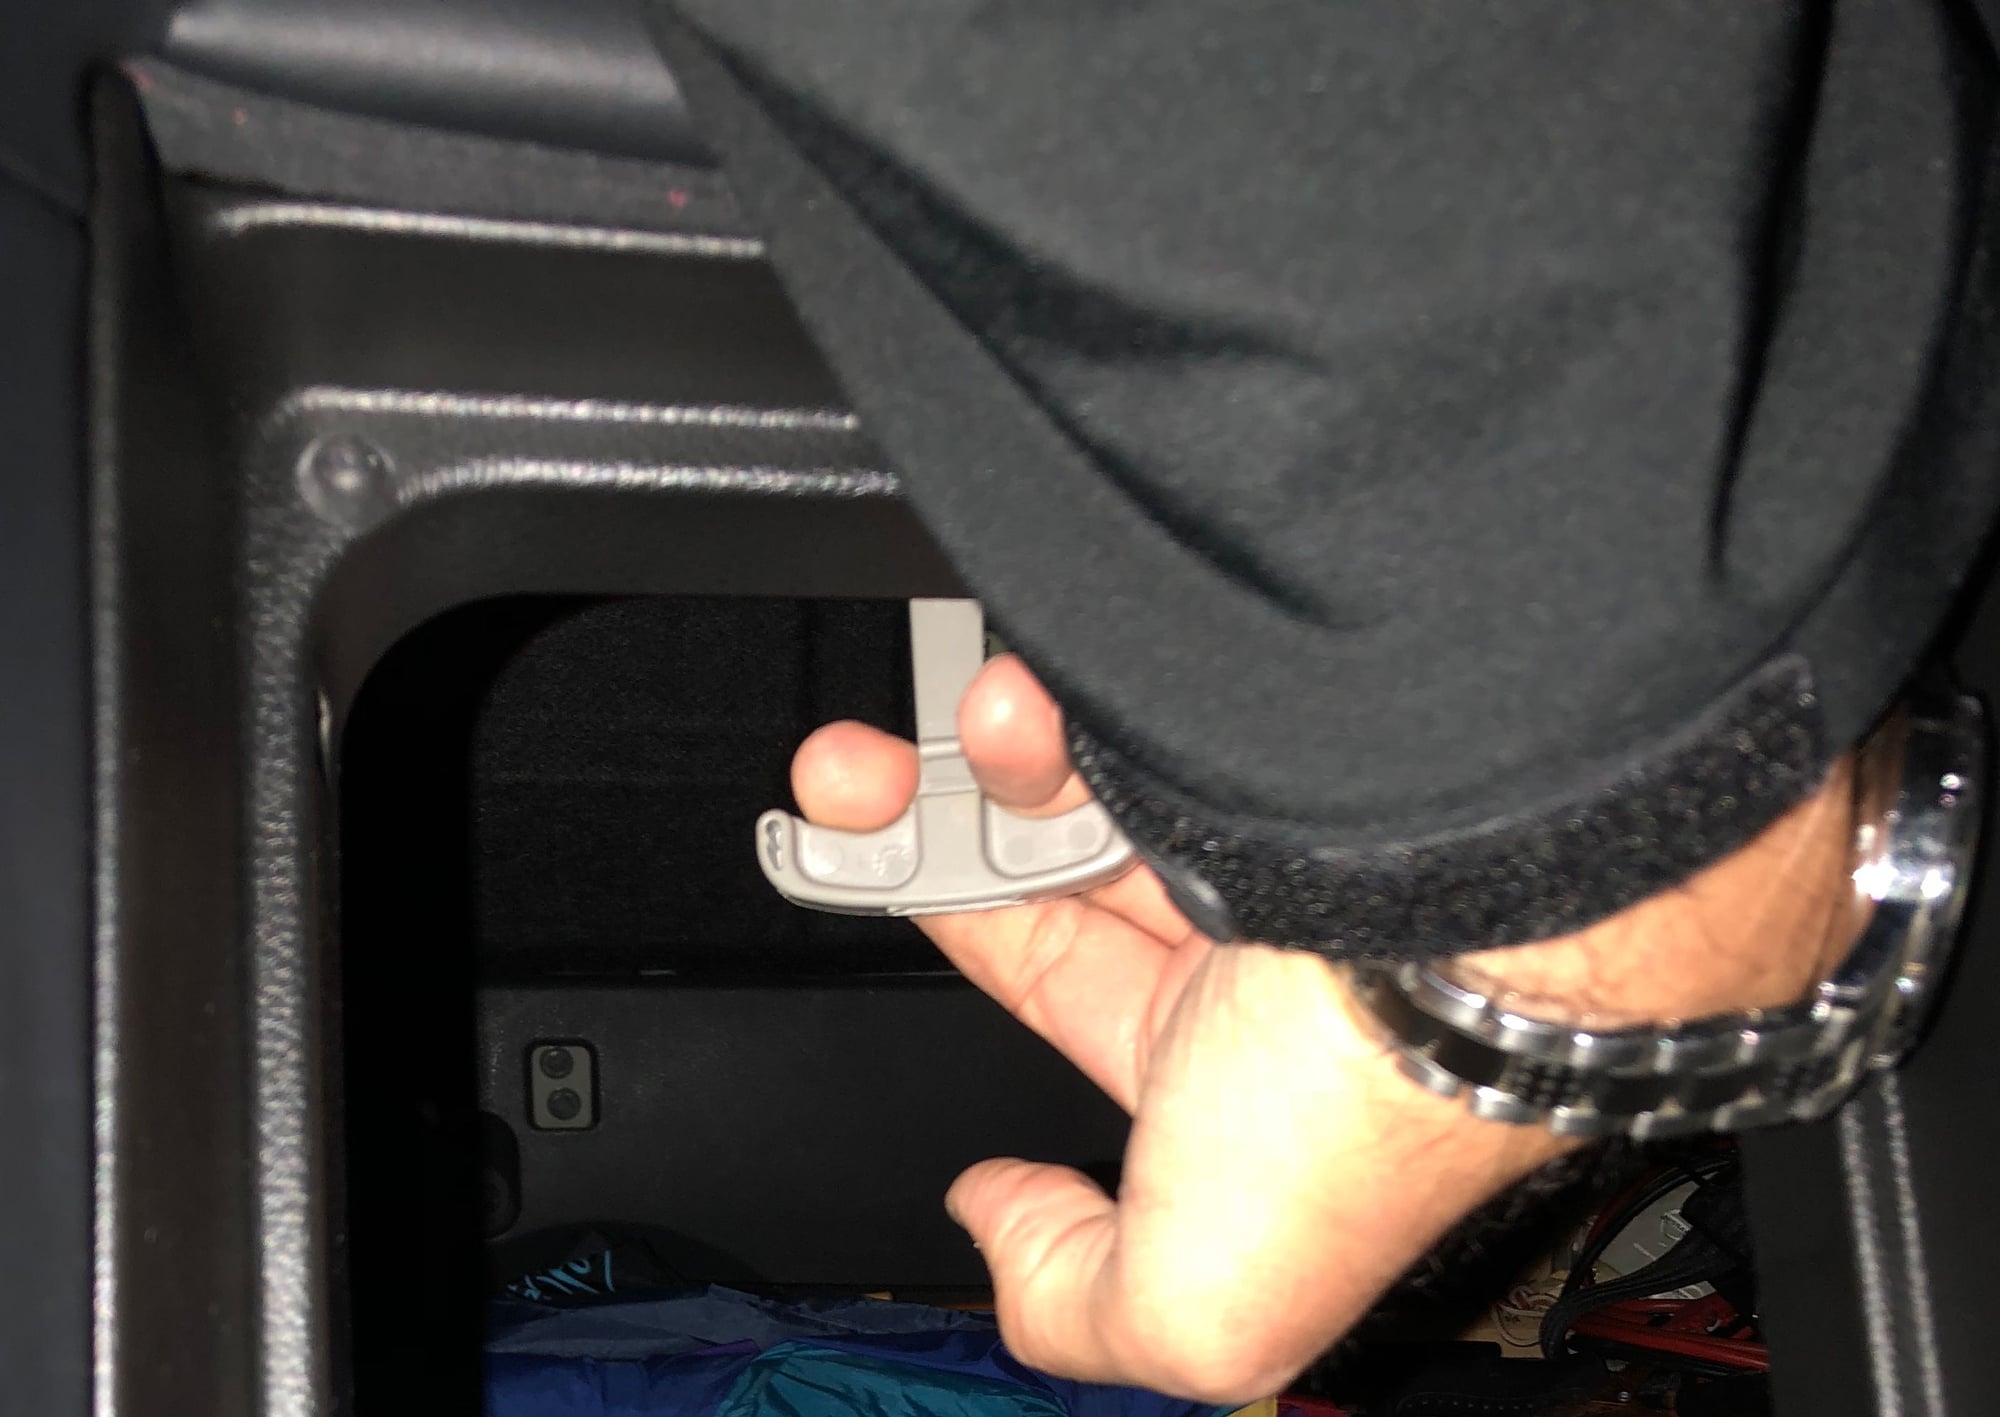 How to Fix A Trunk That Won't Open 